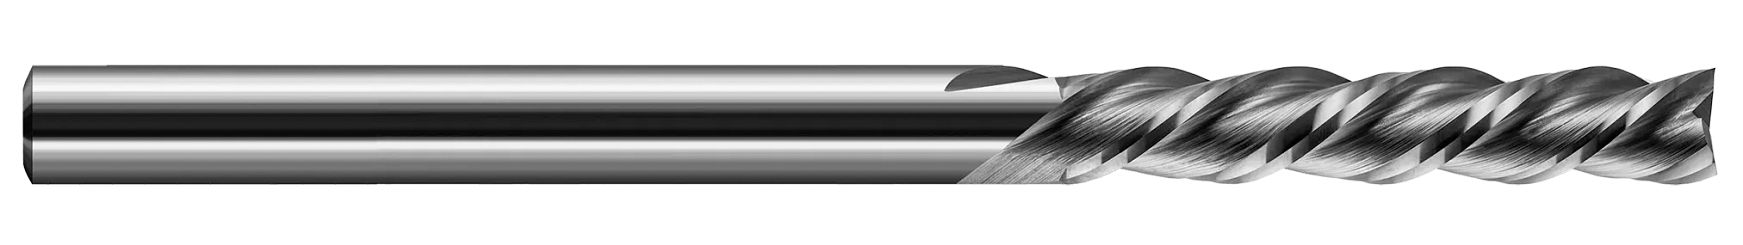 End Mills for Plastics - Finishers - Square Downcut - 3 Flute - High Helix